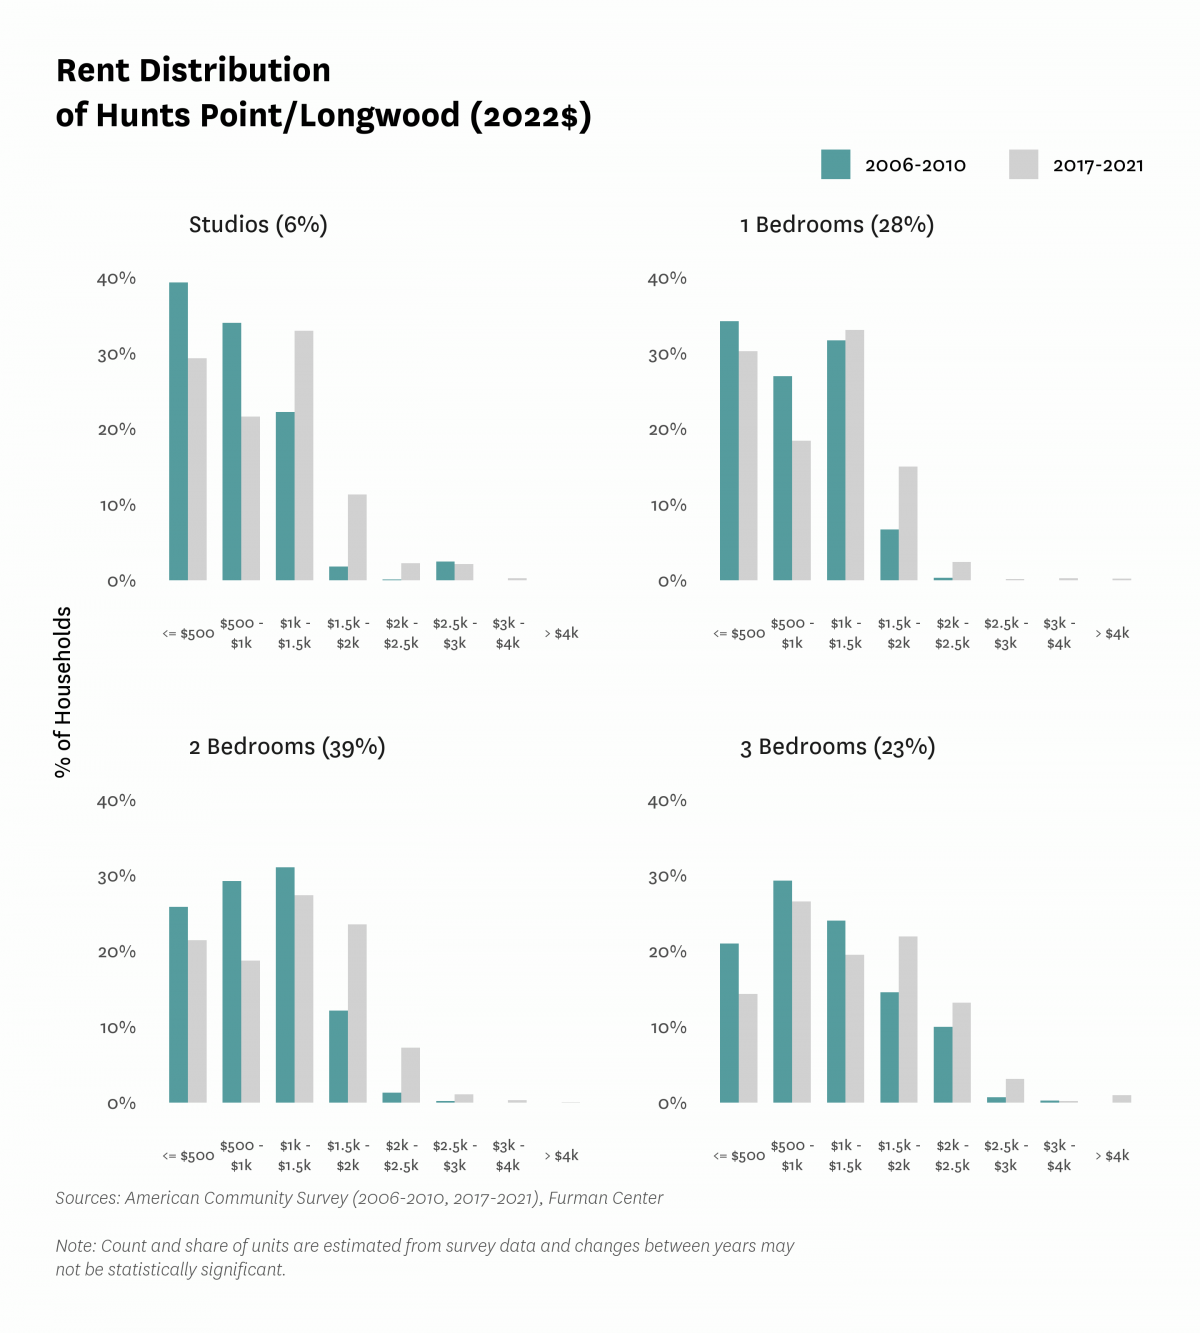 Graph showing the distribution of rents in Hunts Point/Longwood in both 2010 and 2017-2021.